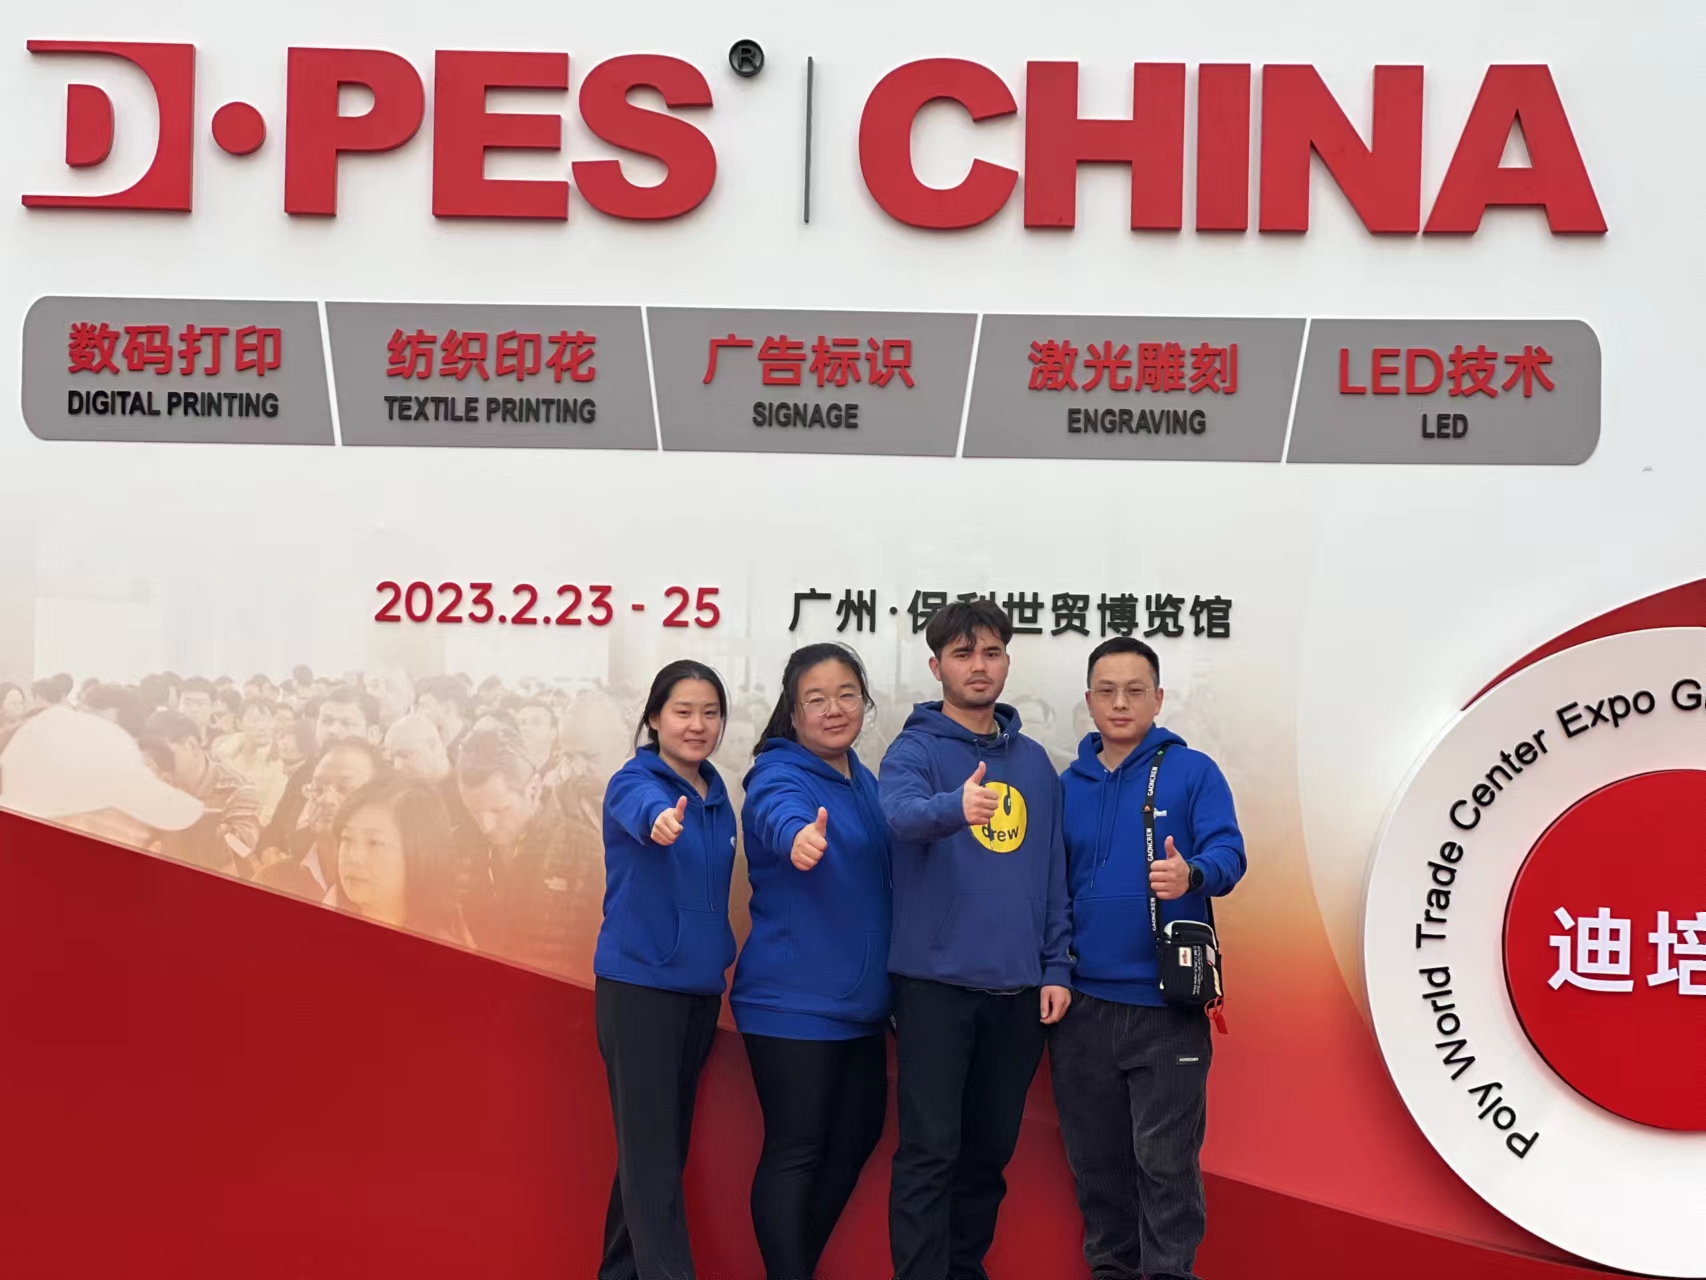 Welcome to Visit Us at D.PES expo, Guangzhou, hall 1, A1051